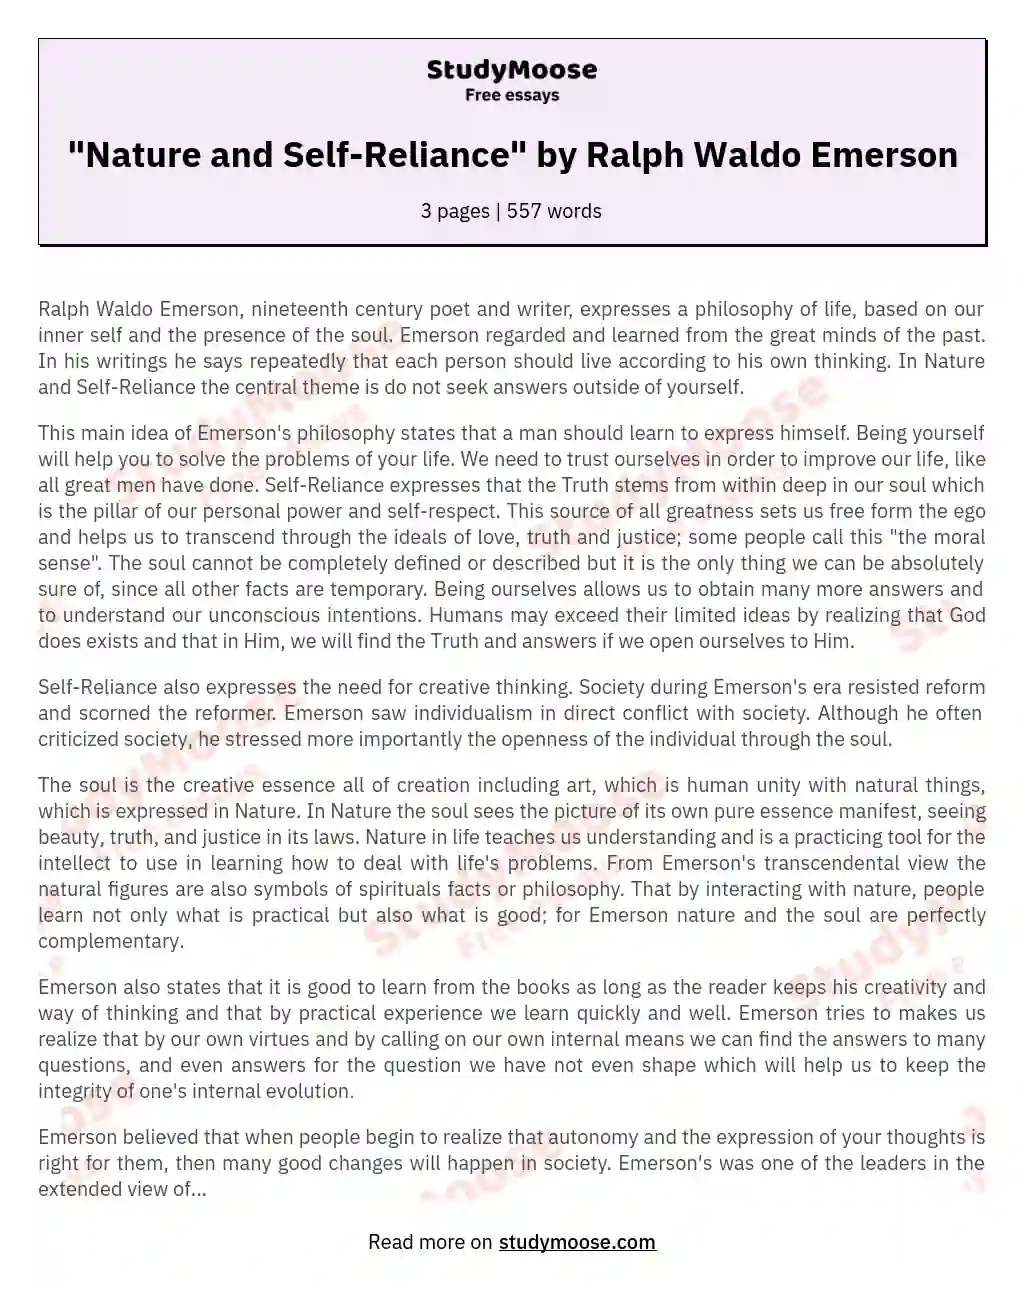 "Nature and Self-Reliance" by Ralph Waldo Emerson